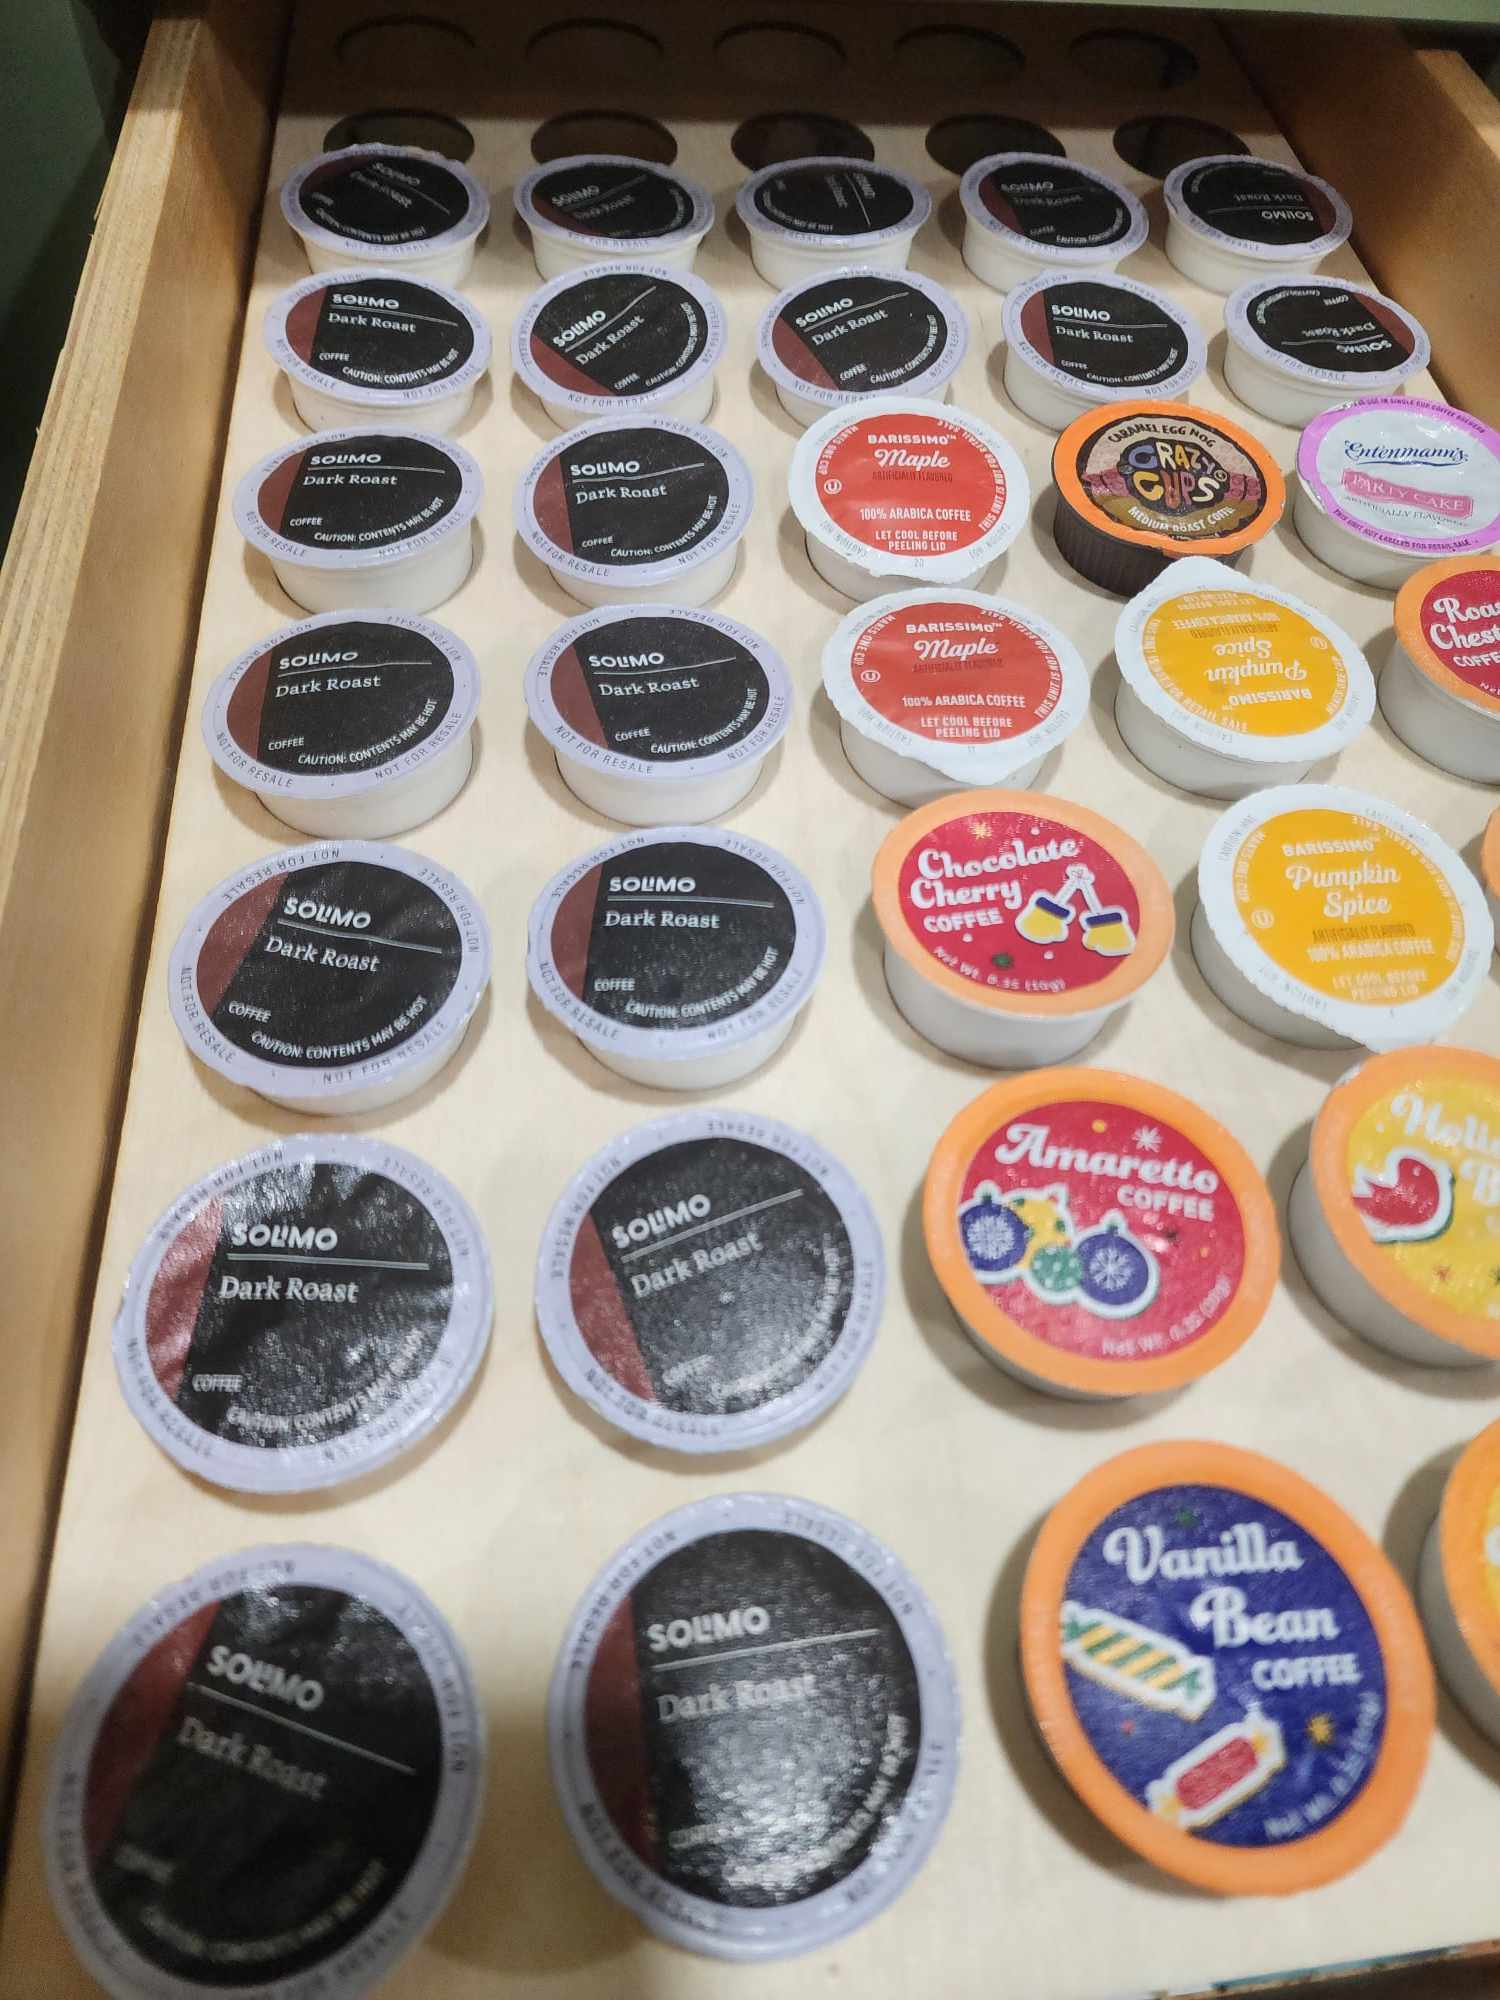 Shows a coffee k cup drawer organizer full of coffee pods